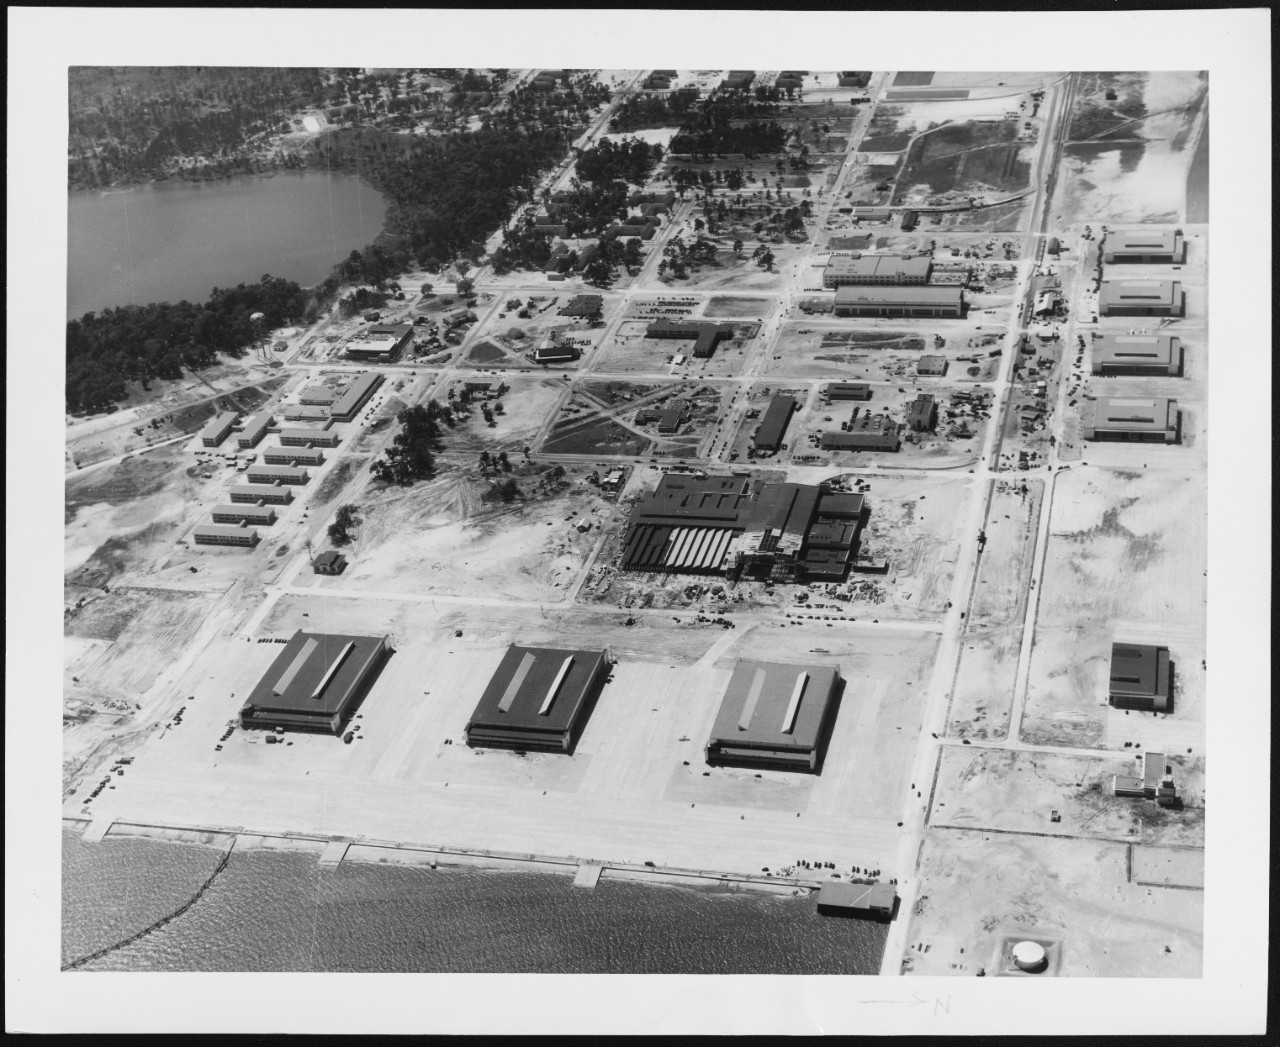 U.S. Naval Air Station, Jacksonville, Florida. Industrial Area. March 31, 1941